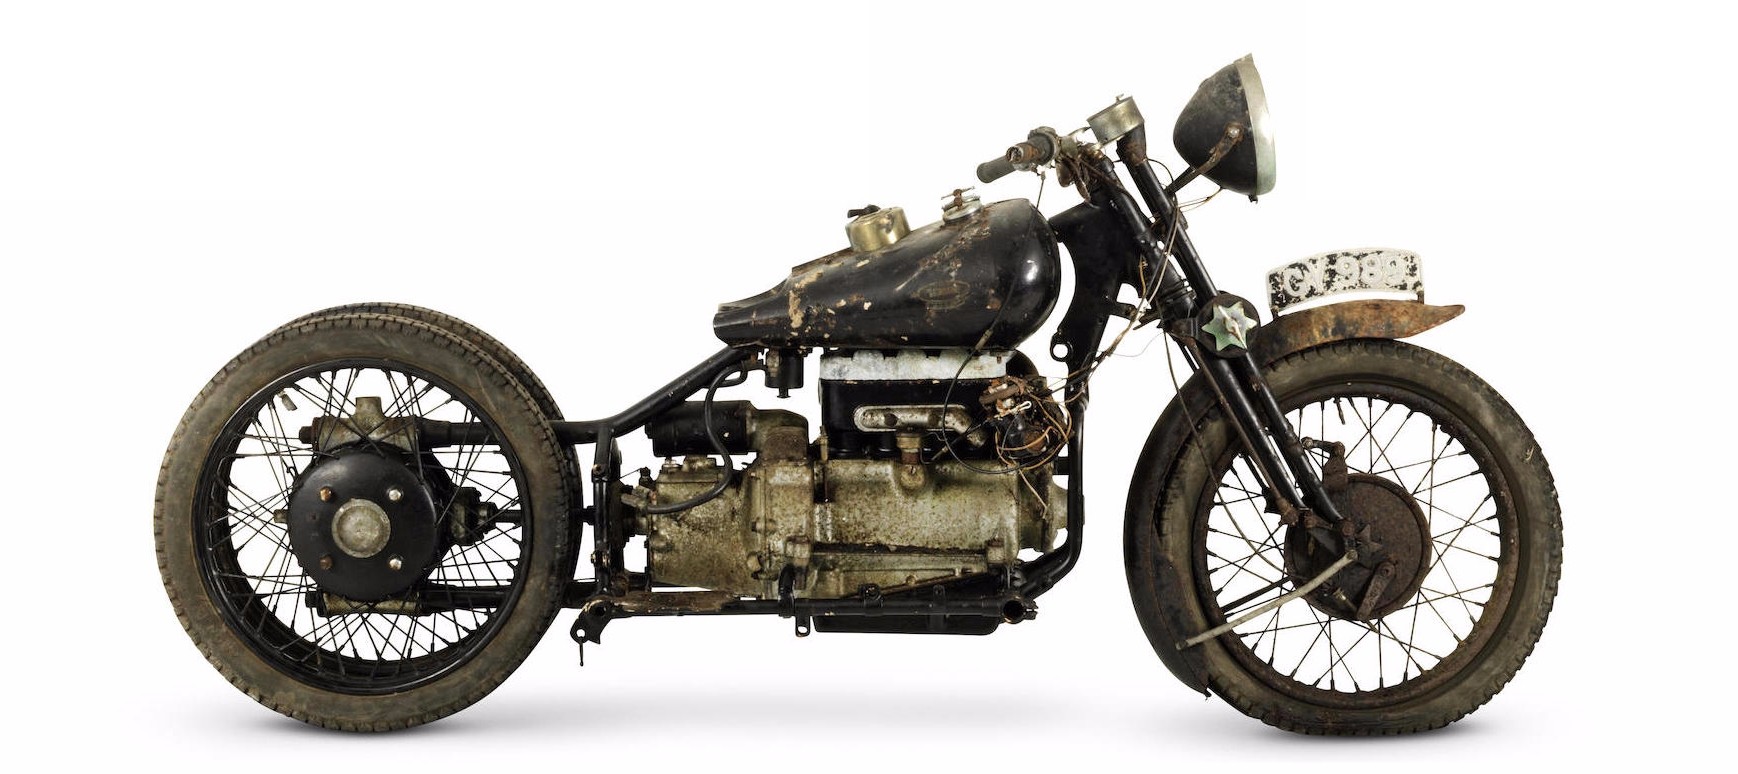 old-brough-superior-bikes-thought-lost-discovered-now-worth-a-small-fortune-photo-gallery_9-autonovosti.me-5